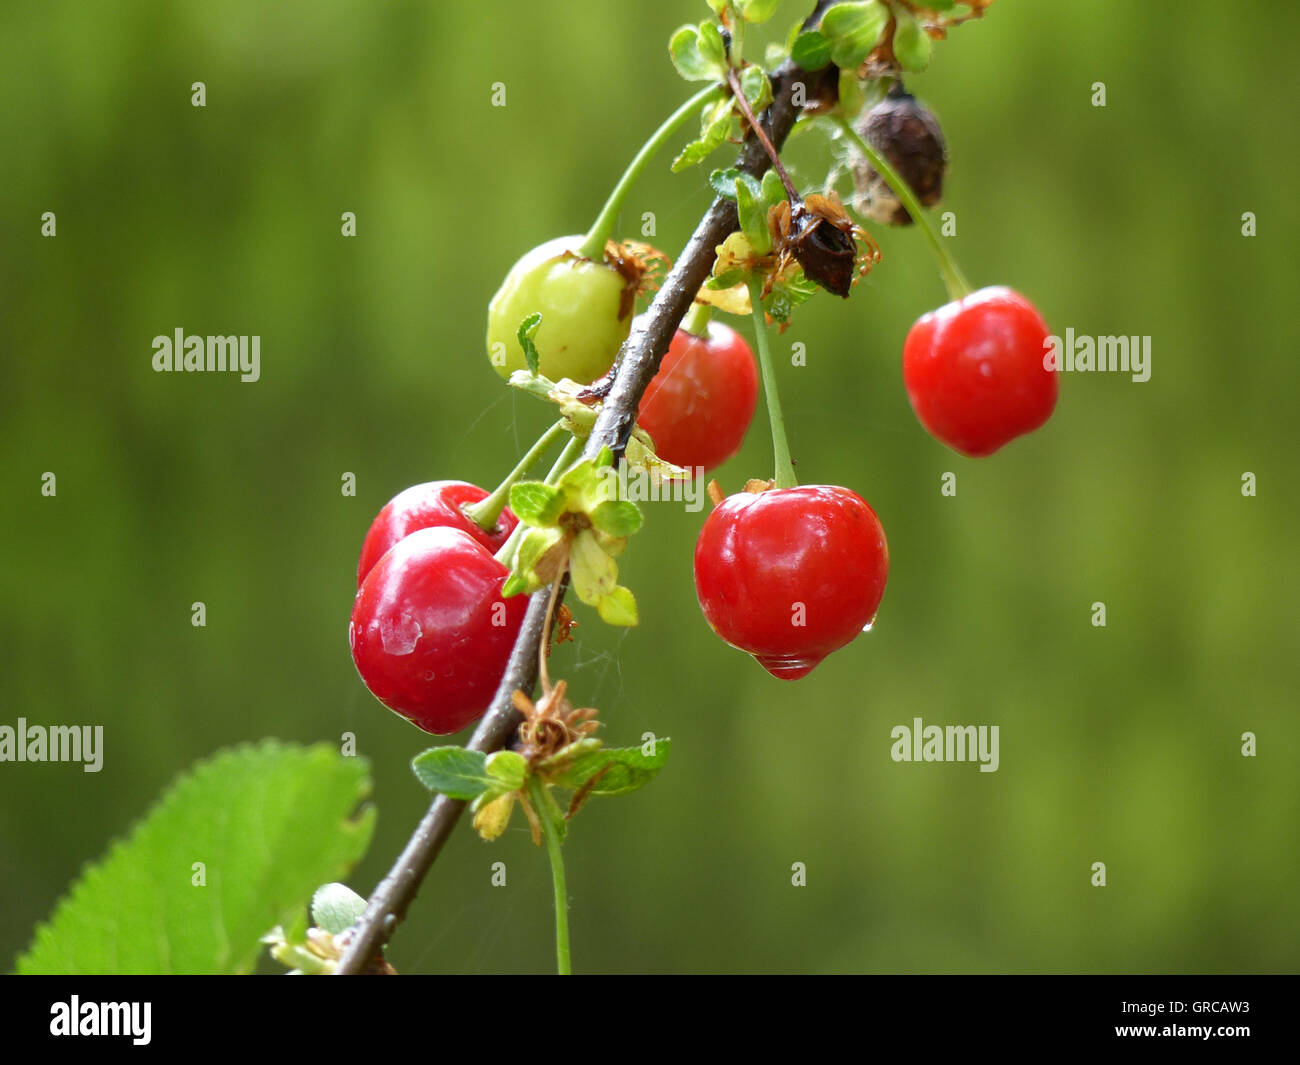 Sour Cherries With Drops Of Water On The Branch, After A Rain Stock Photo